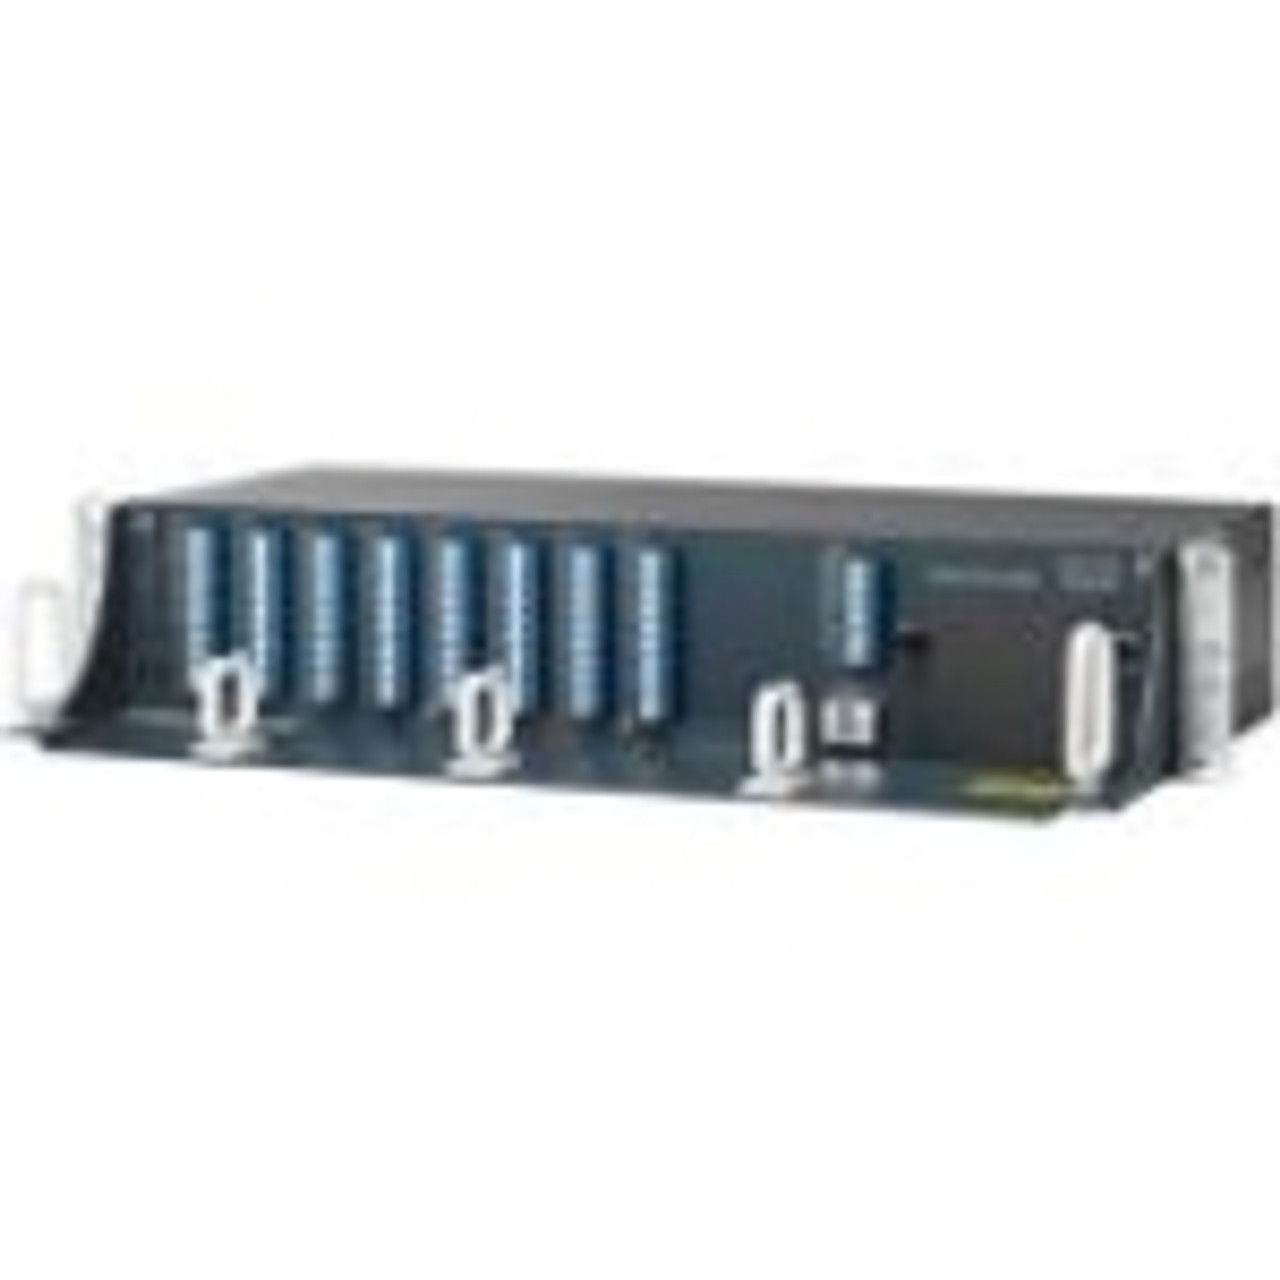 15216-EF-40-EVEN= Cisco ONS 15216 40 Channel Mux/DeMux Exposed Faceplate Patch Panel Even (Refurbished)